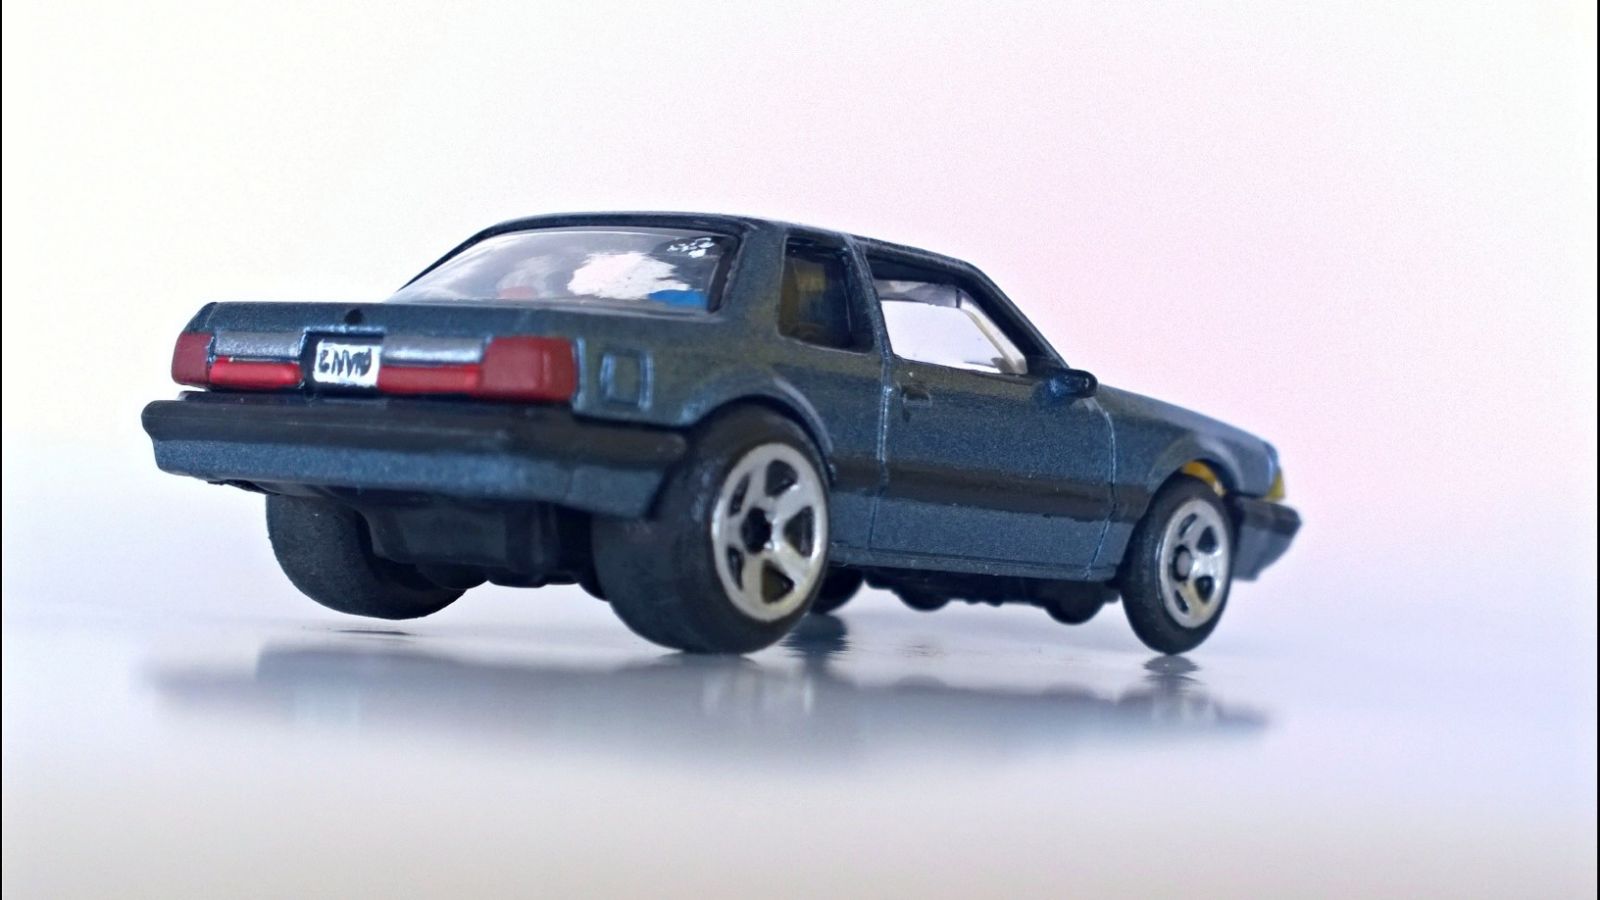 Illustration for article titled Finally finished! My Matchbox Mustang Coupe custom!!